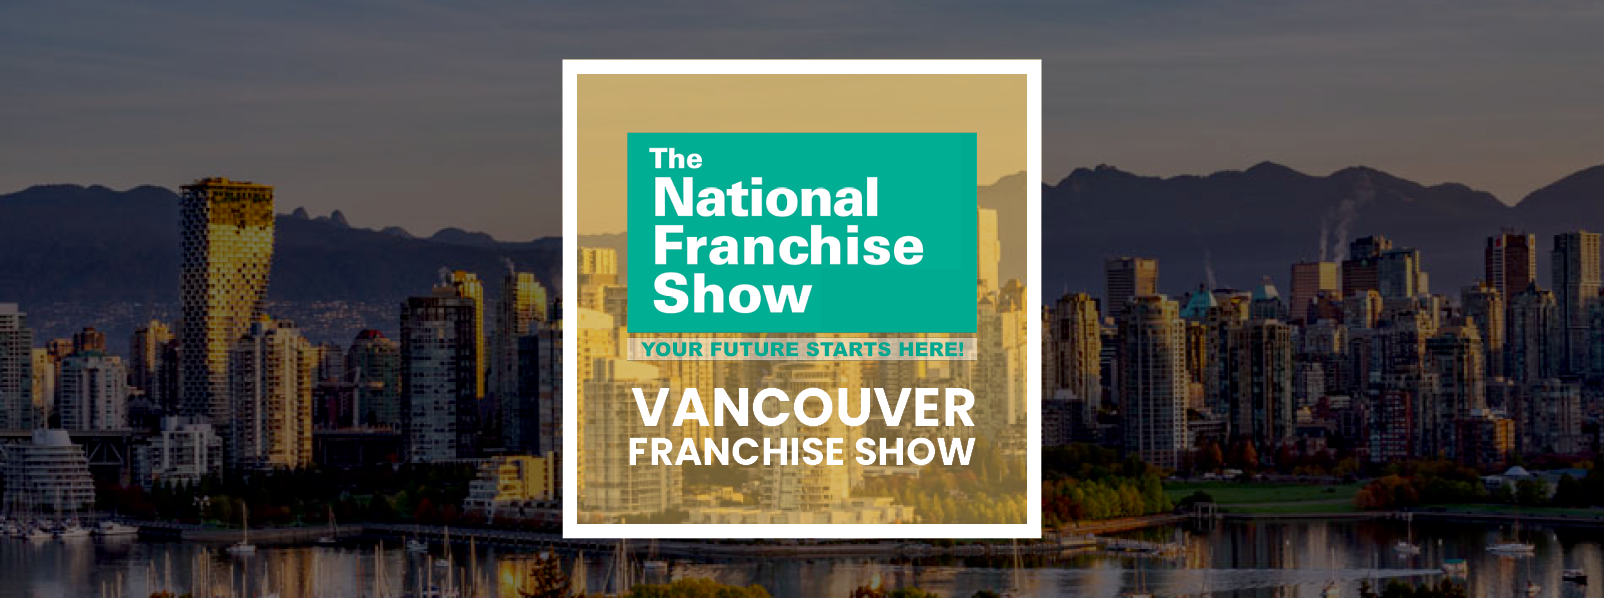 Vancouver Franchise Expo